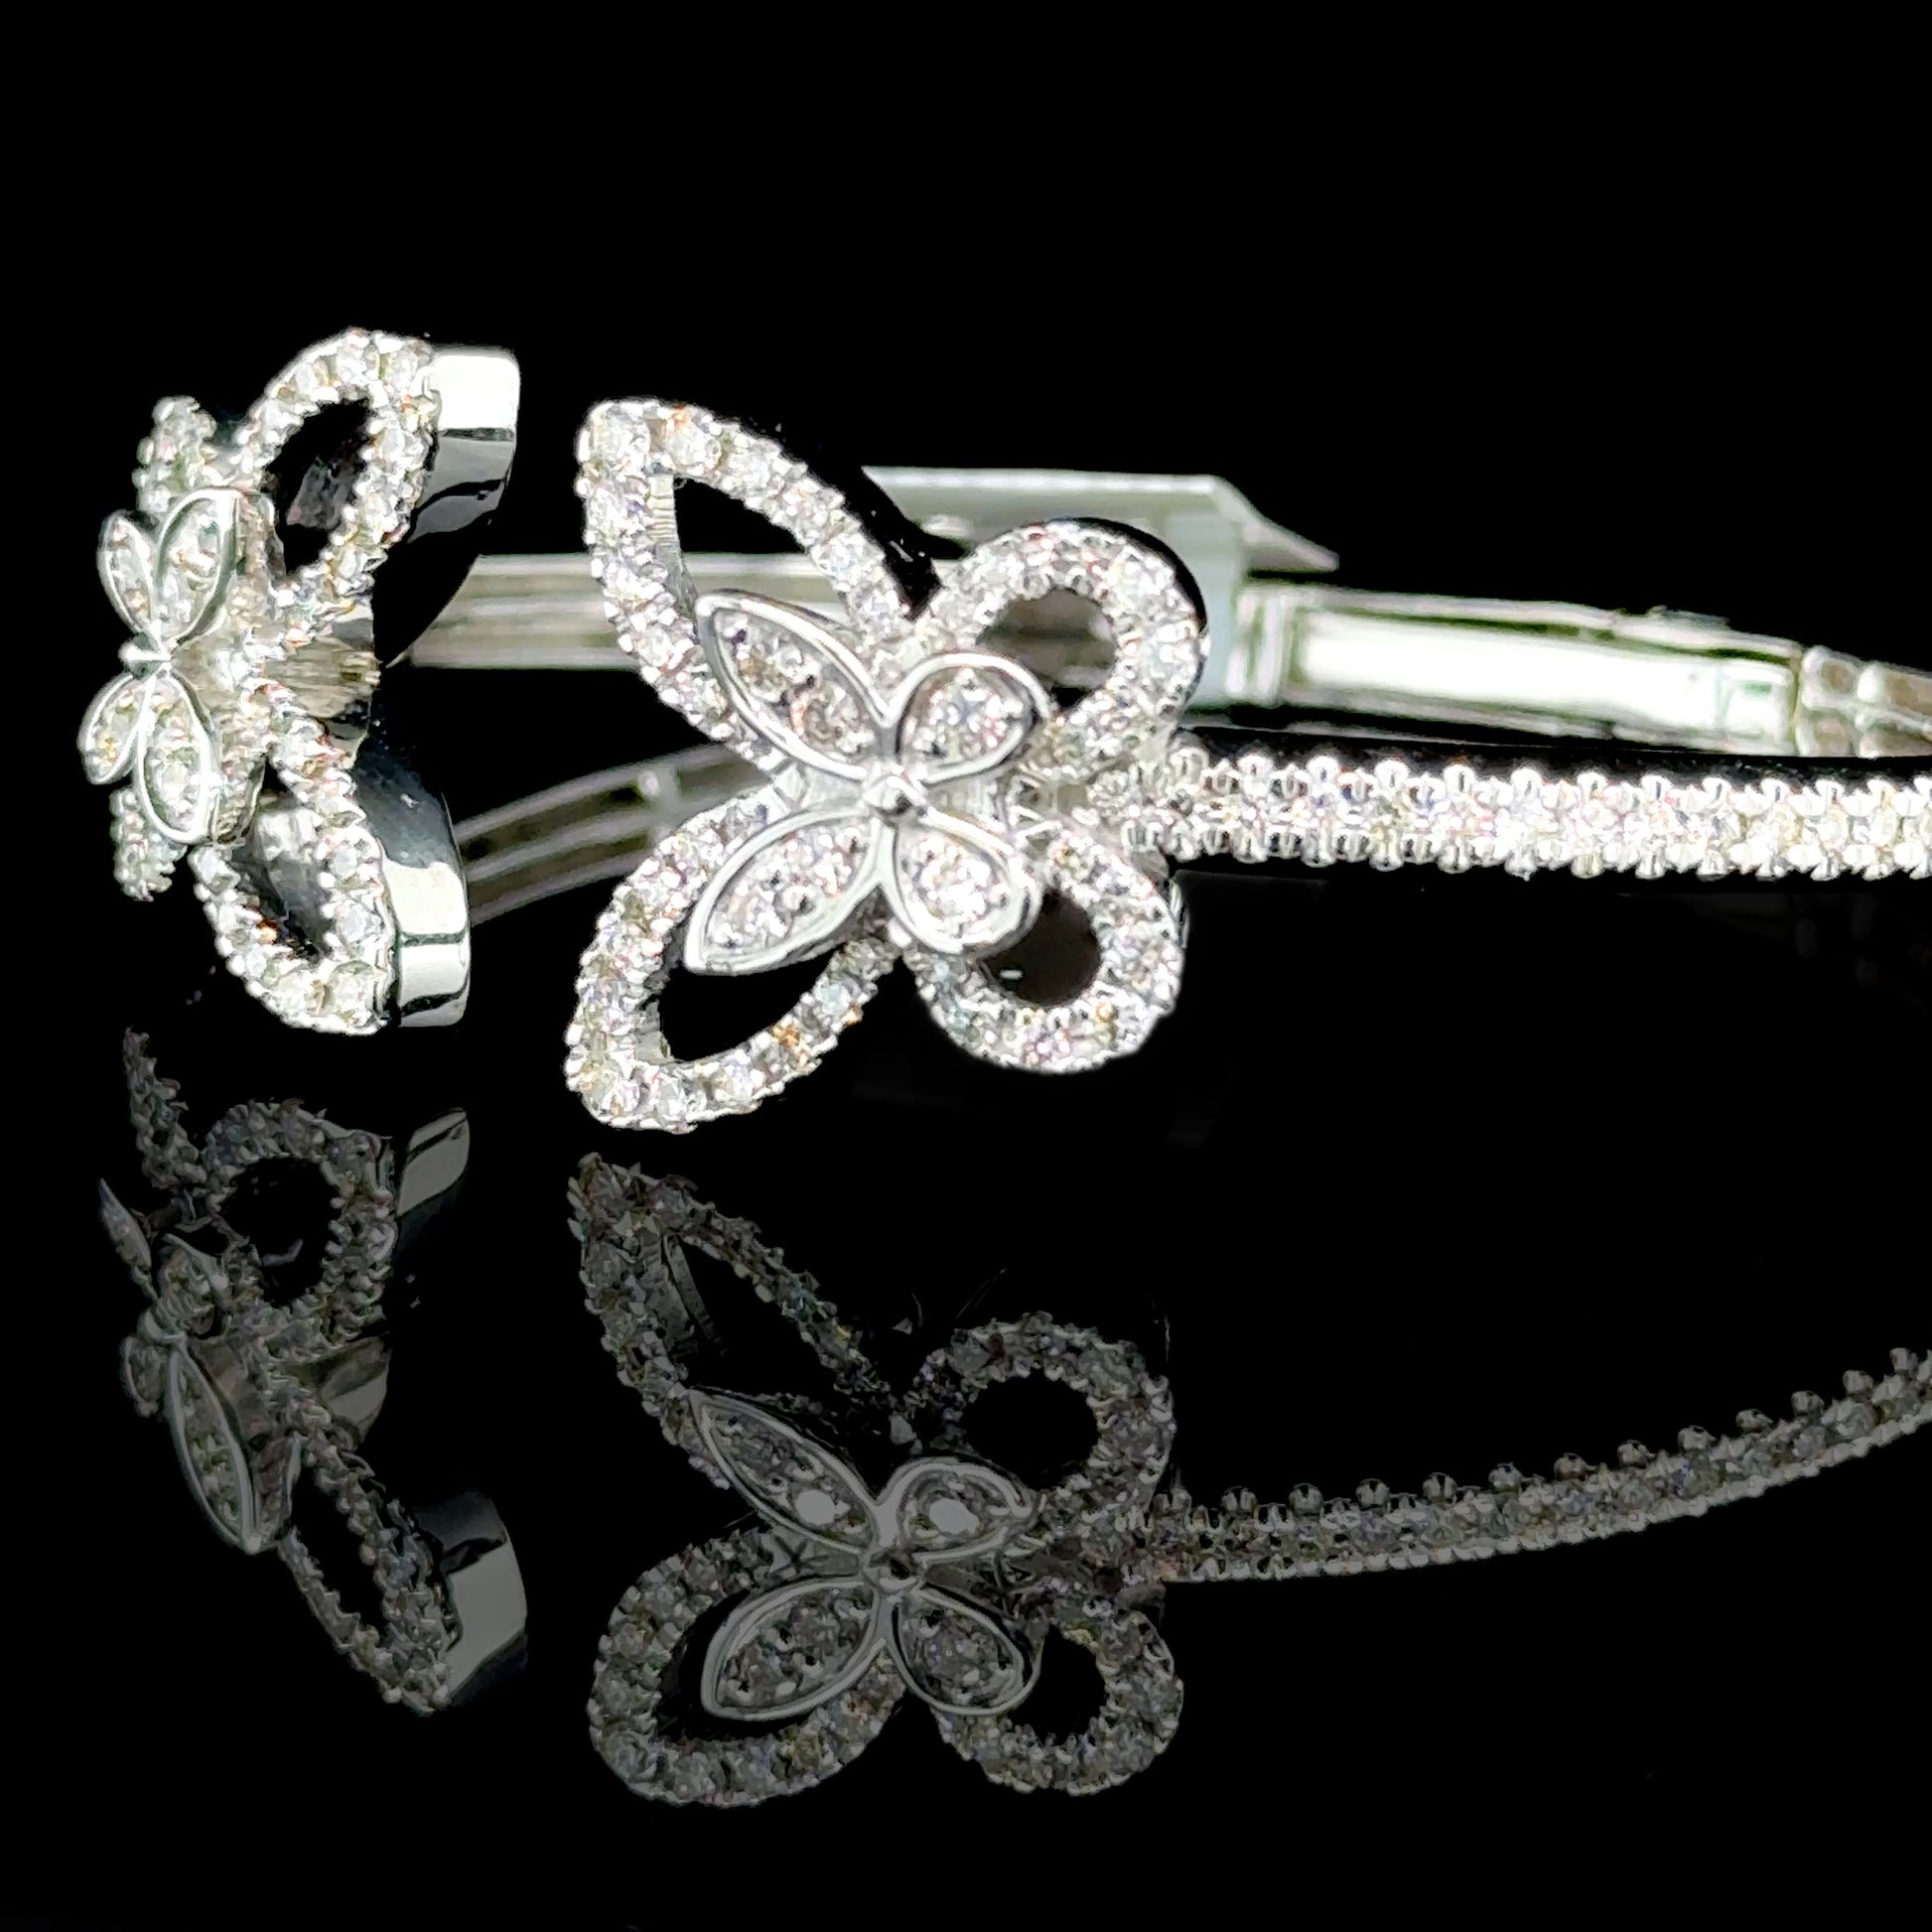 Diamond butterfly bangle in white gold with 1.64ct of diamonds